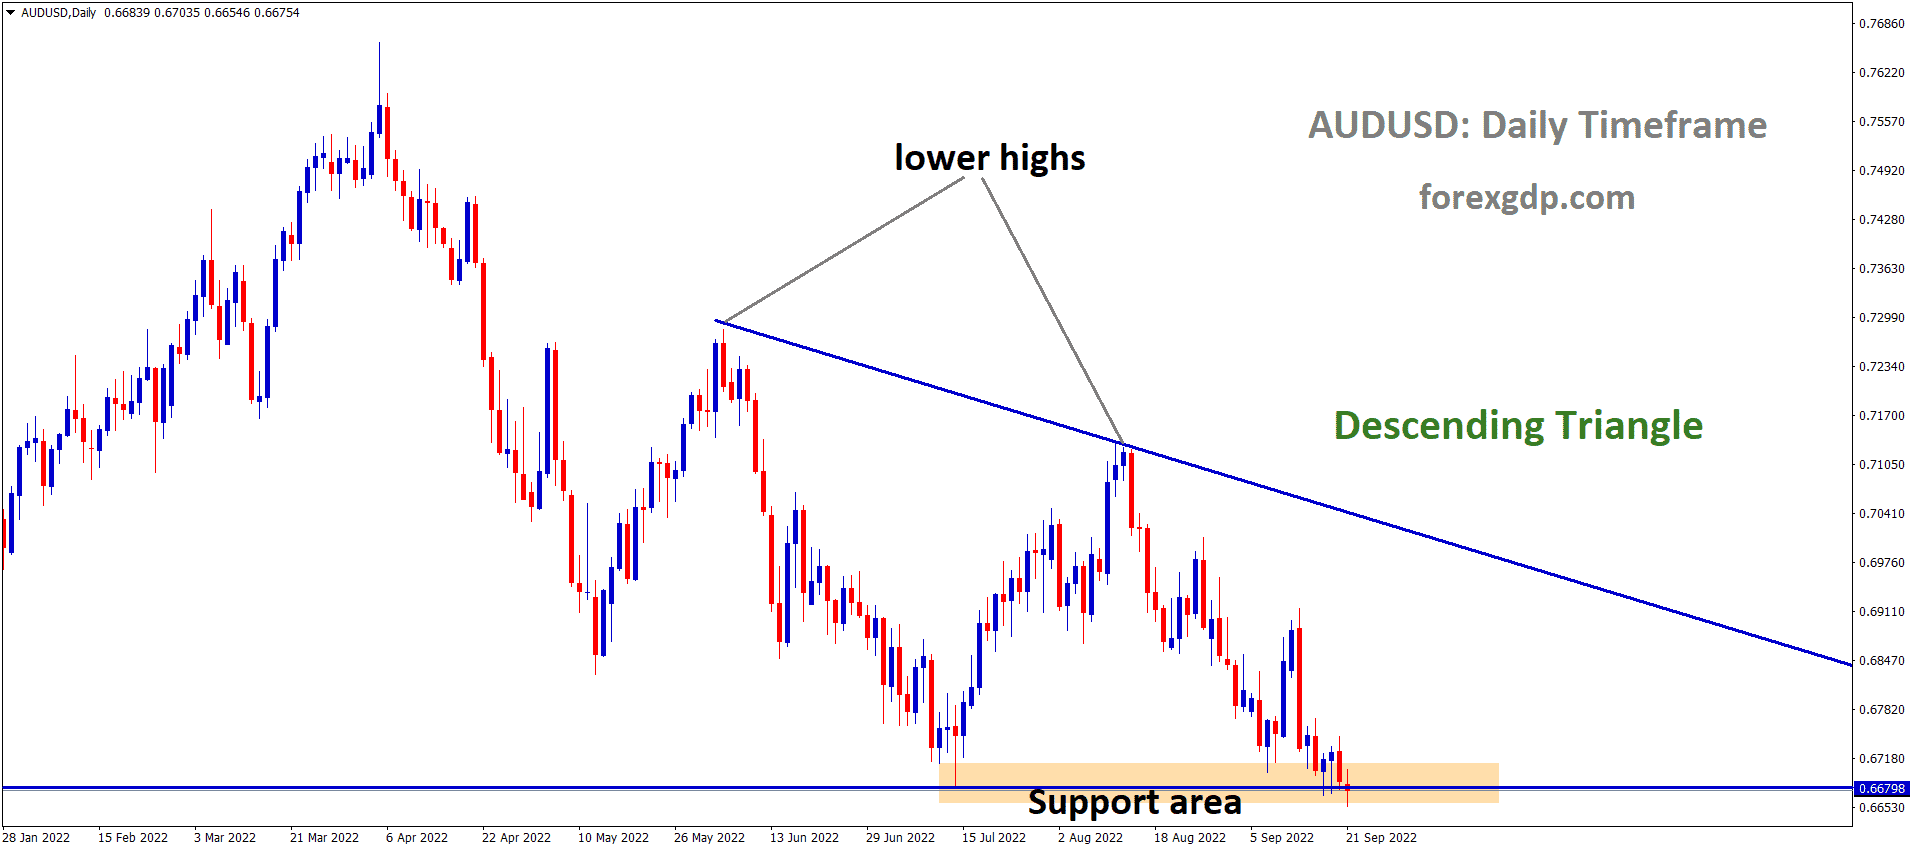 AUDUSD is moving in the Descending triangle pattern and the market has reached the horizontal support area of the pattern 2